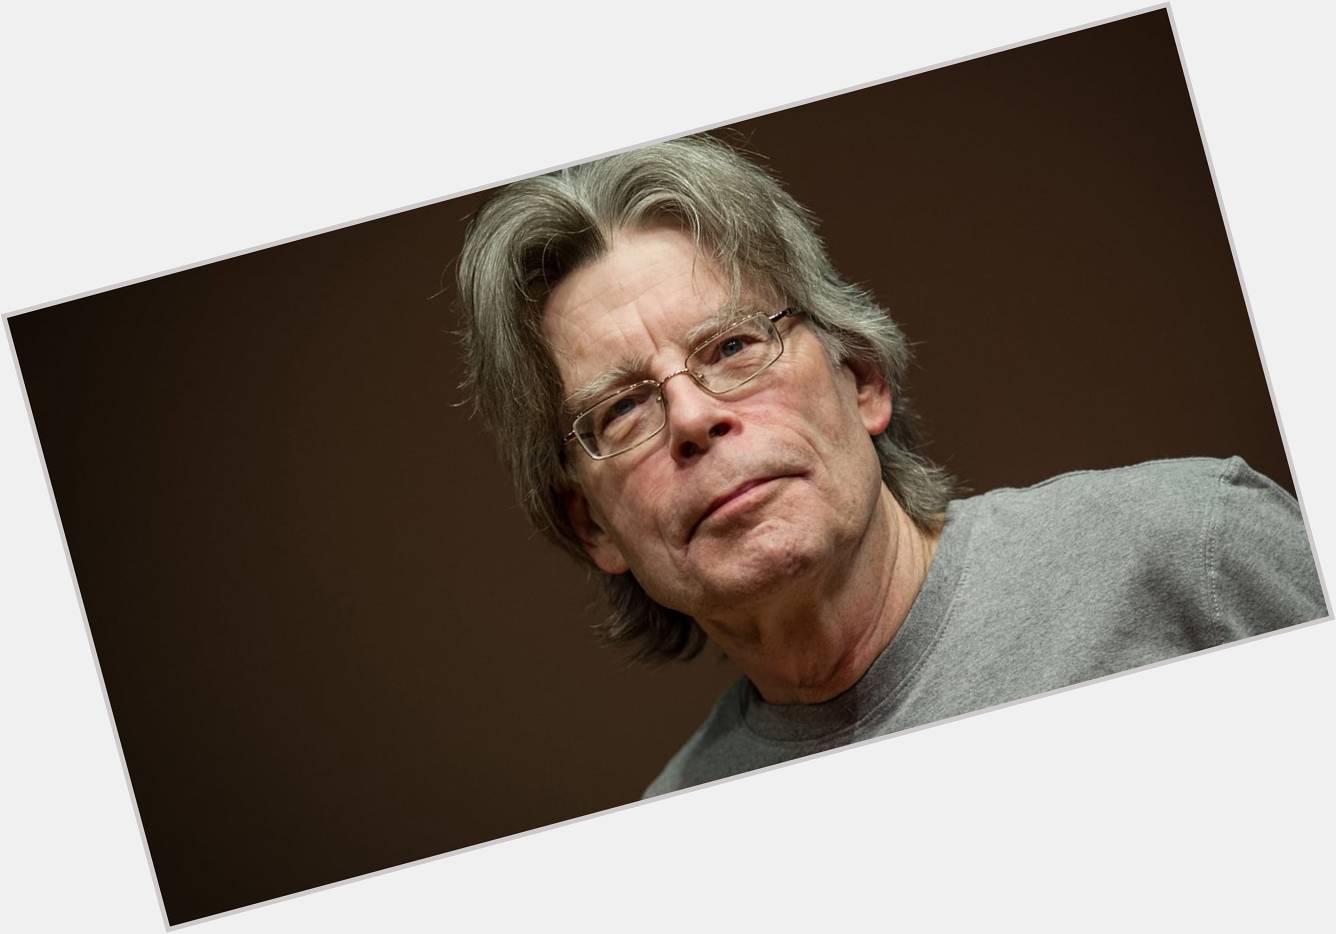 They all float!
A big Happy Birthday to an amazing writer, Mr Stephen King! 